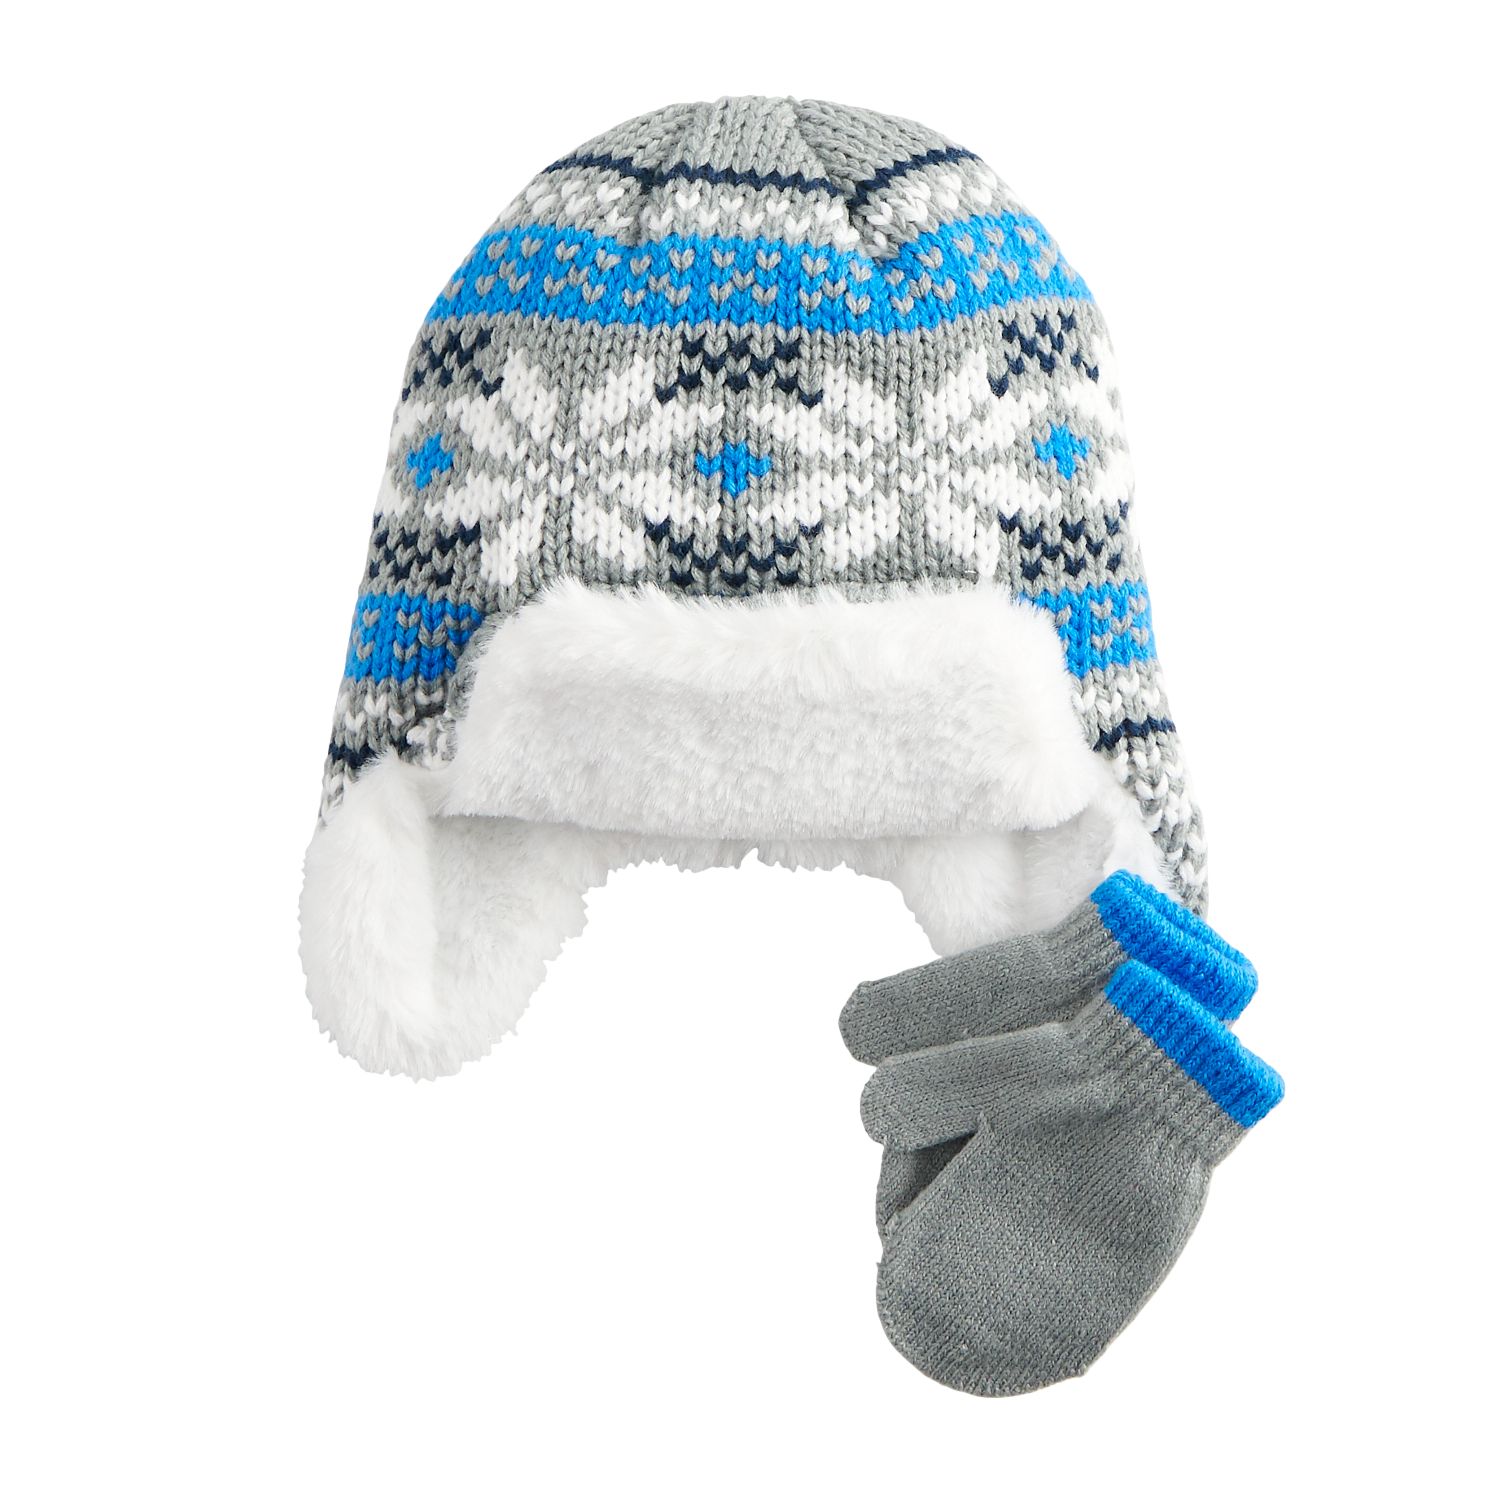 baby boy hat and mittens